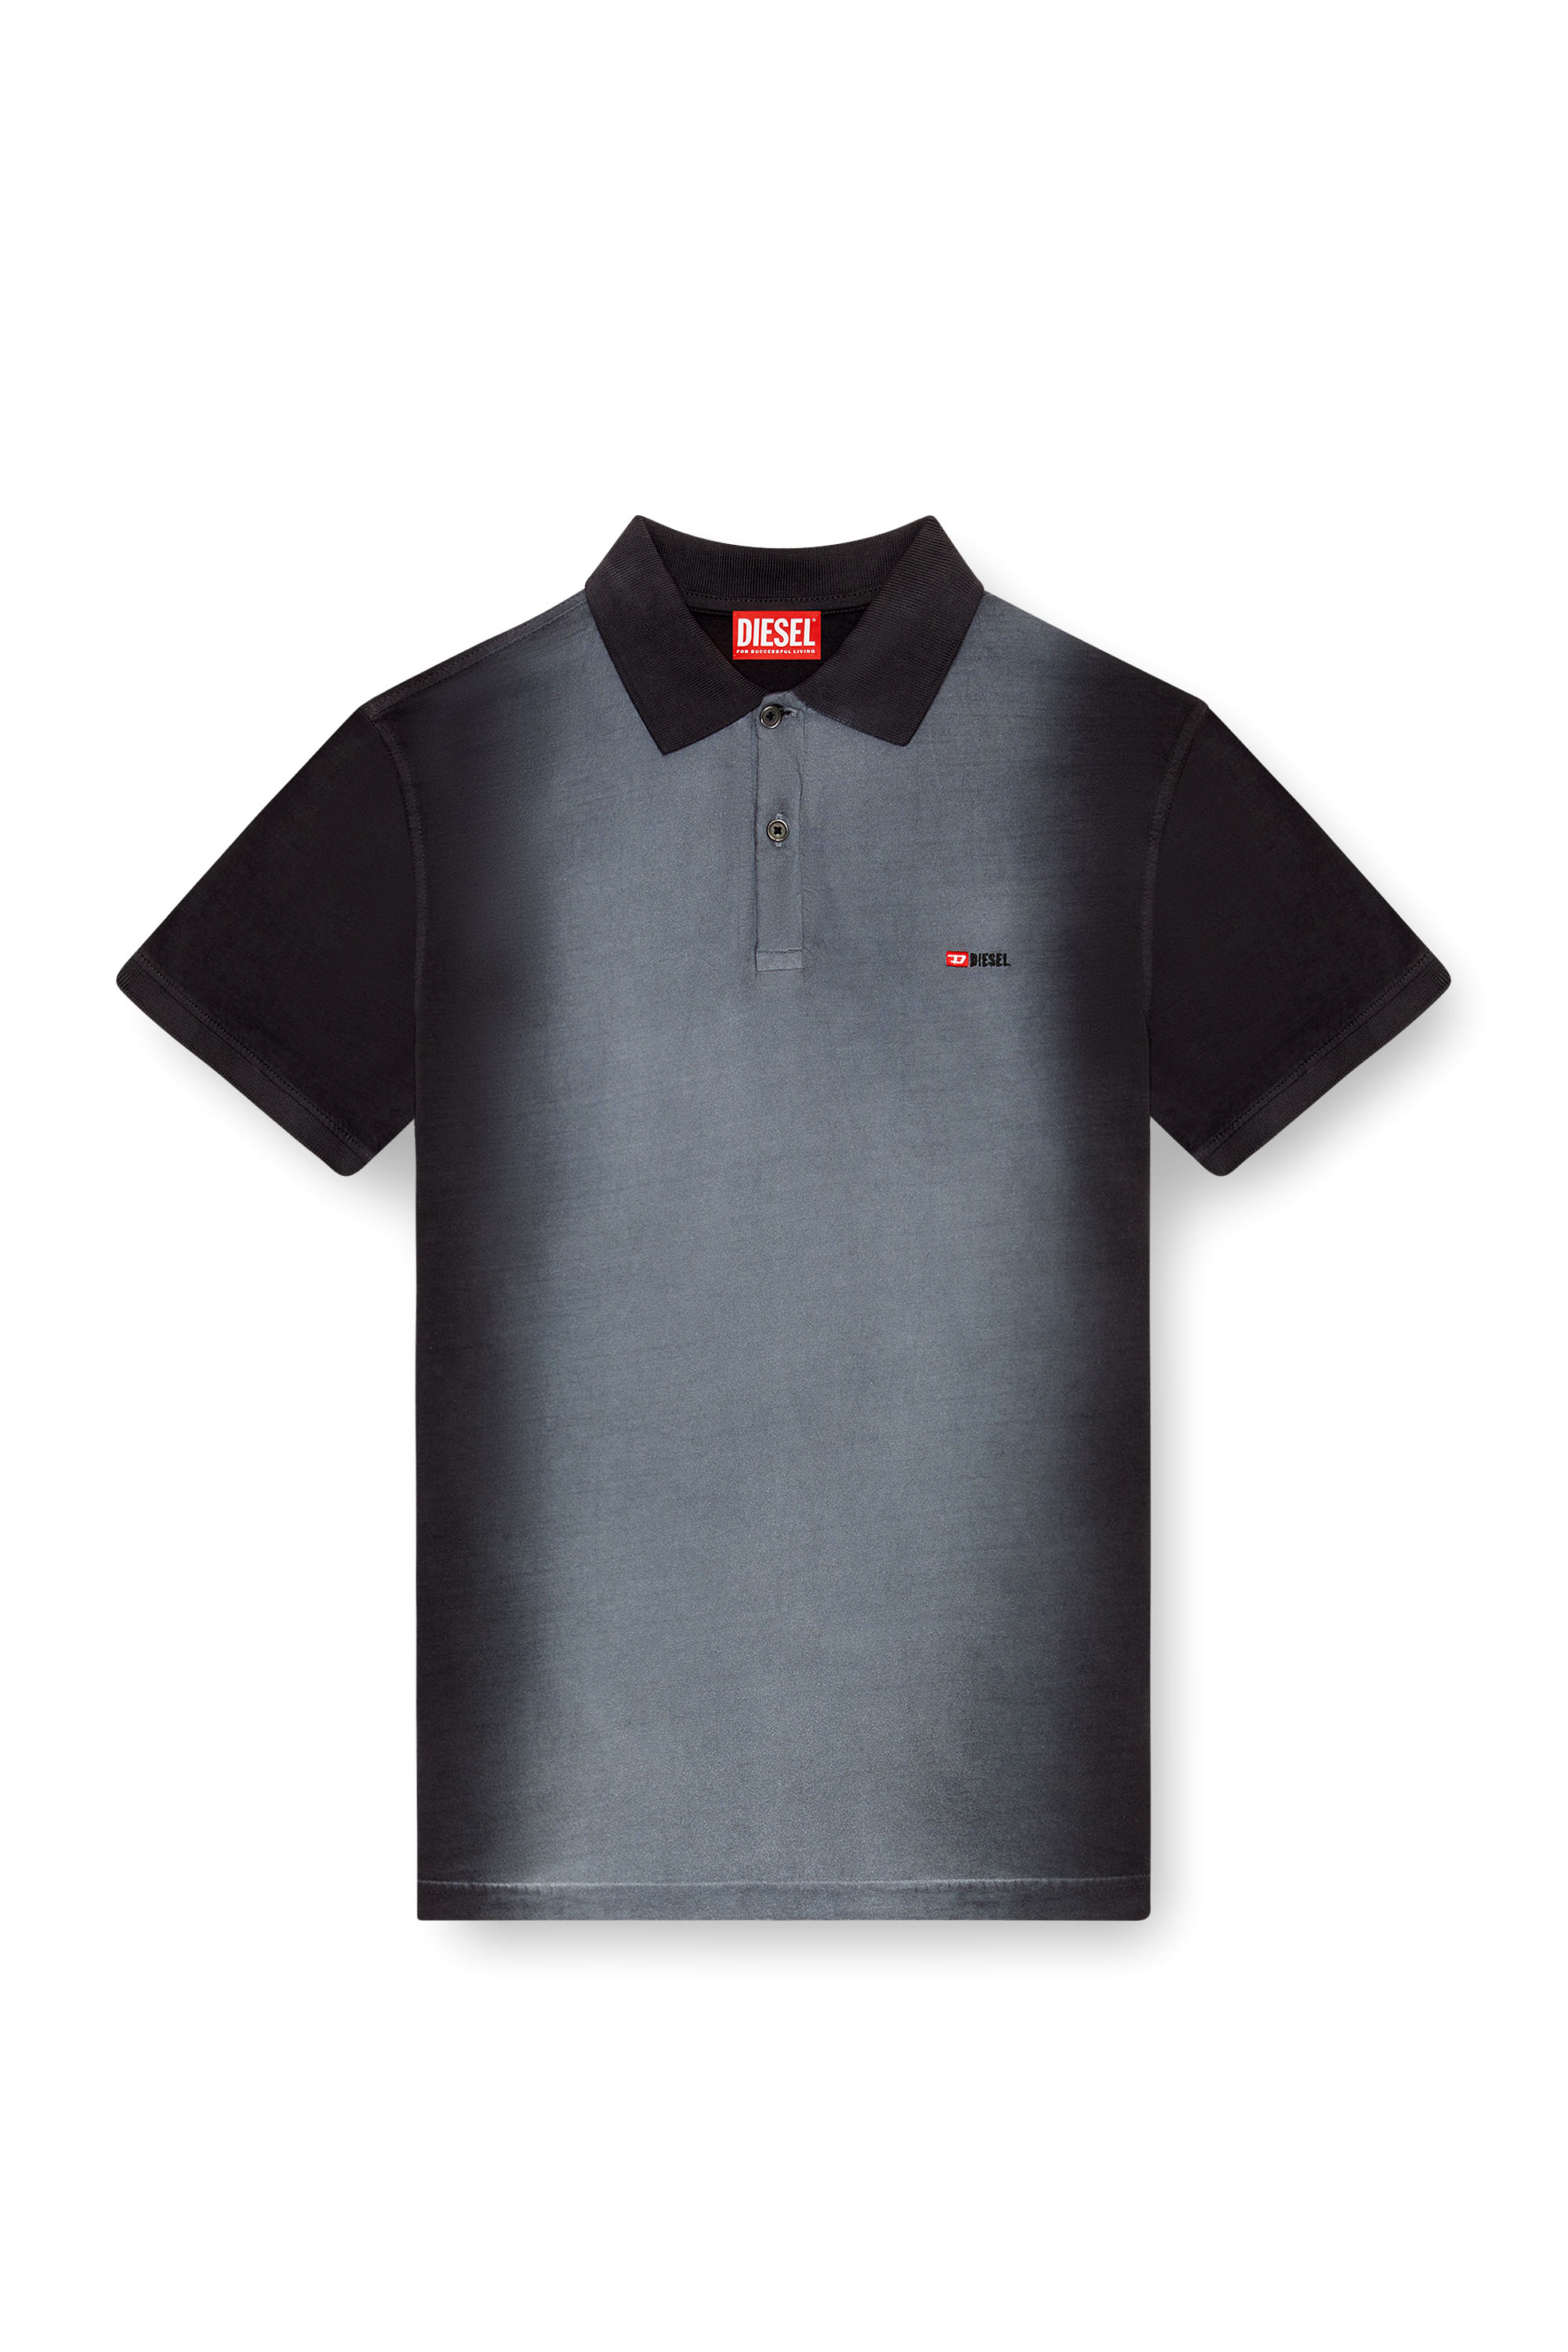 Diesel - T-REJUST-Q1, Man Polo shirt with spray treatment in Black - Image 4